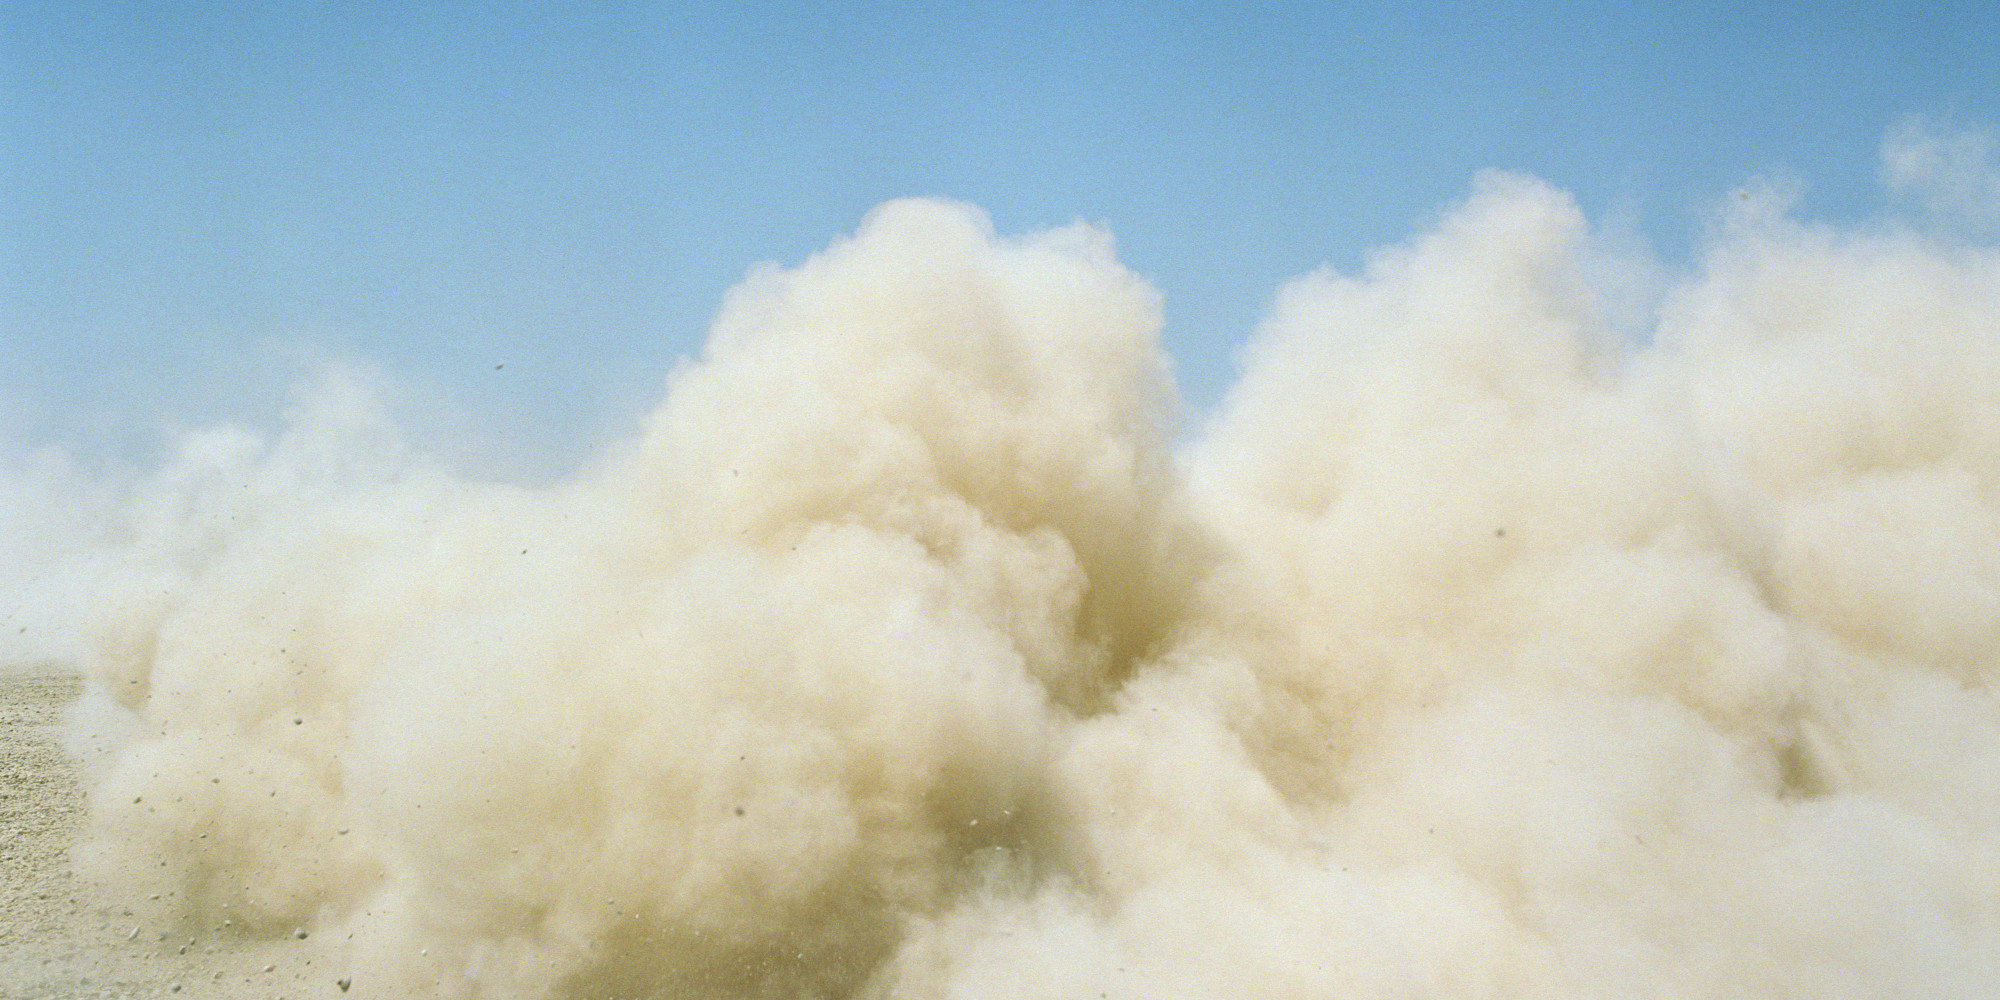 Florida Researcher To Examine Potential Health Risks Of Dust Clouds ...